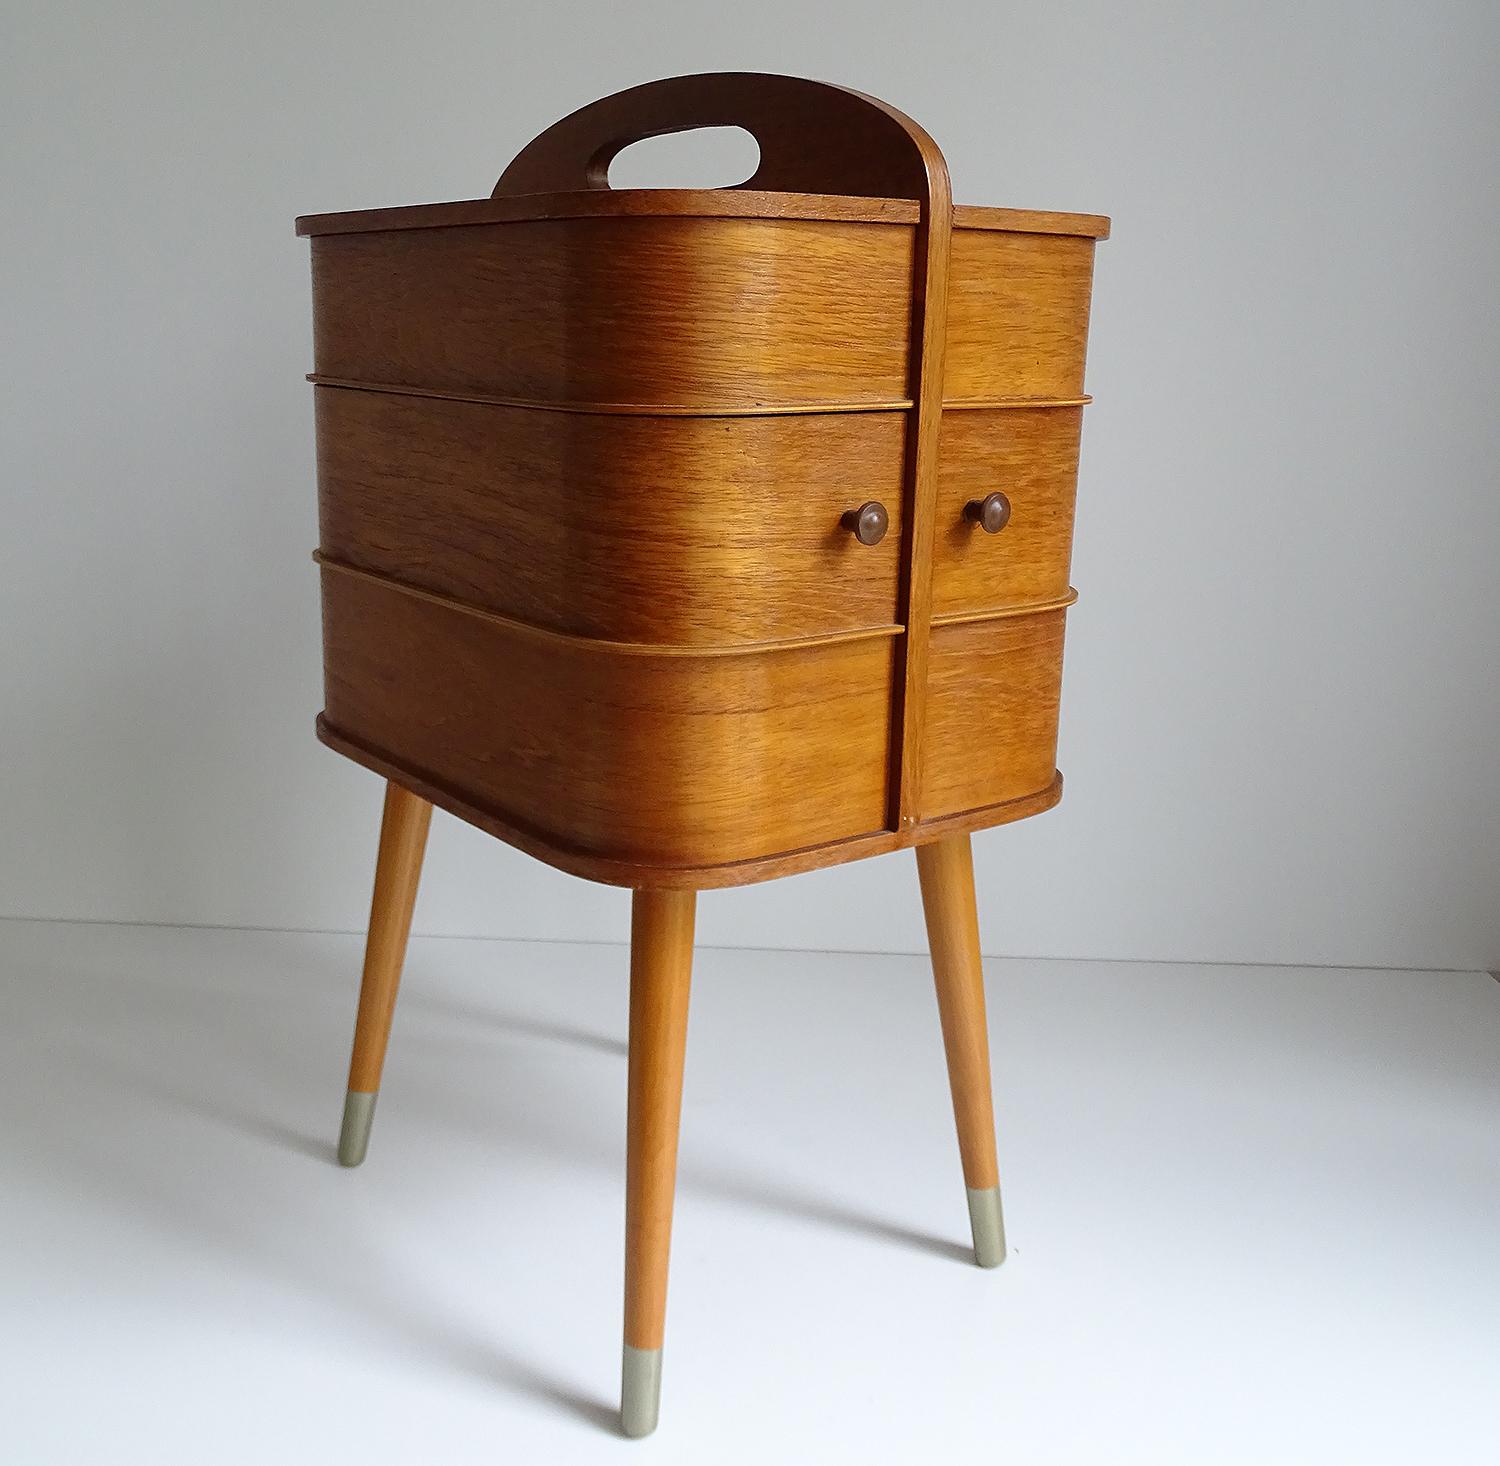 Stunning original Danish modern midcentury 1950s-1960s sewing box / side table with handle on top.
The box features 2 drawers which rotate sidewise revealing underneath 2 more compartments, the uppermost levels have also compartments under side